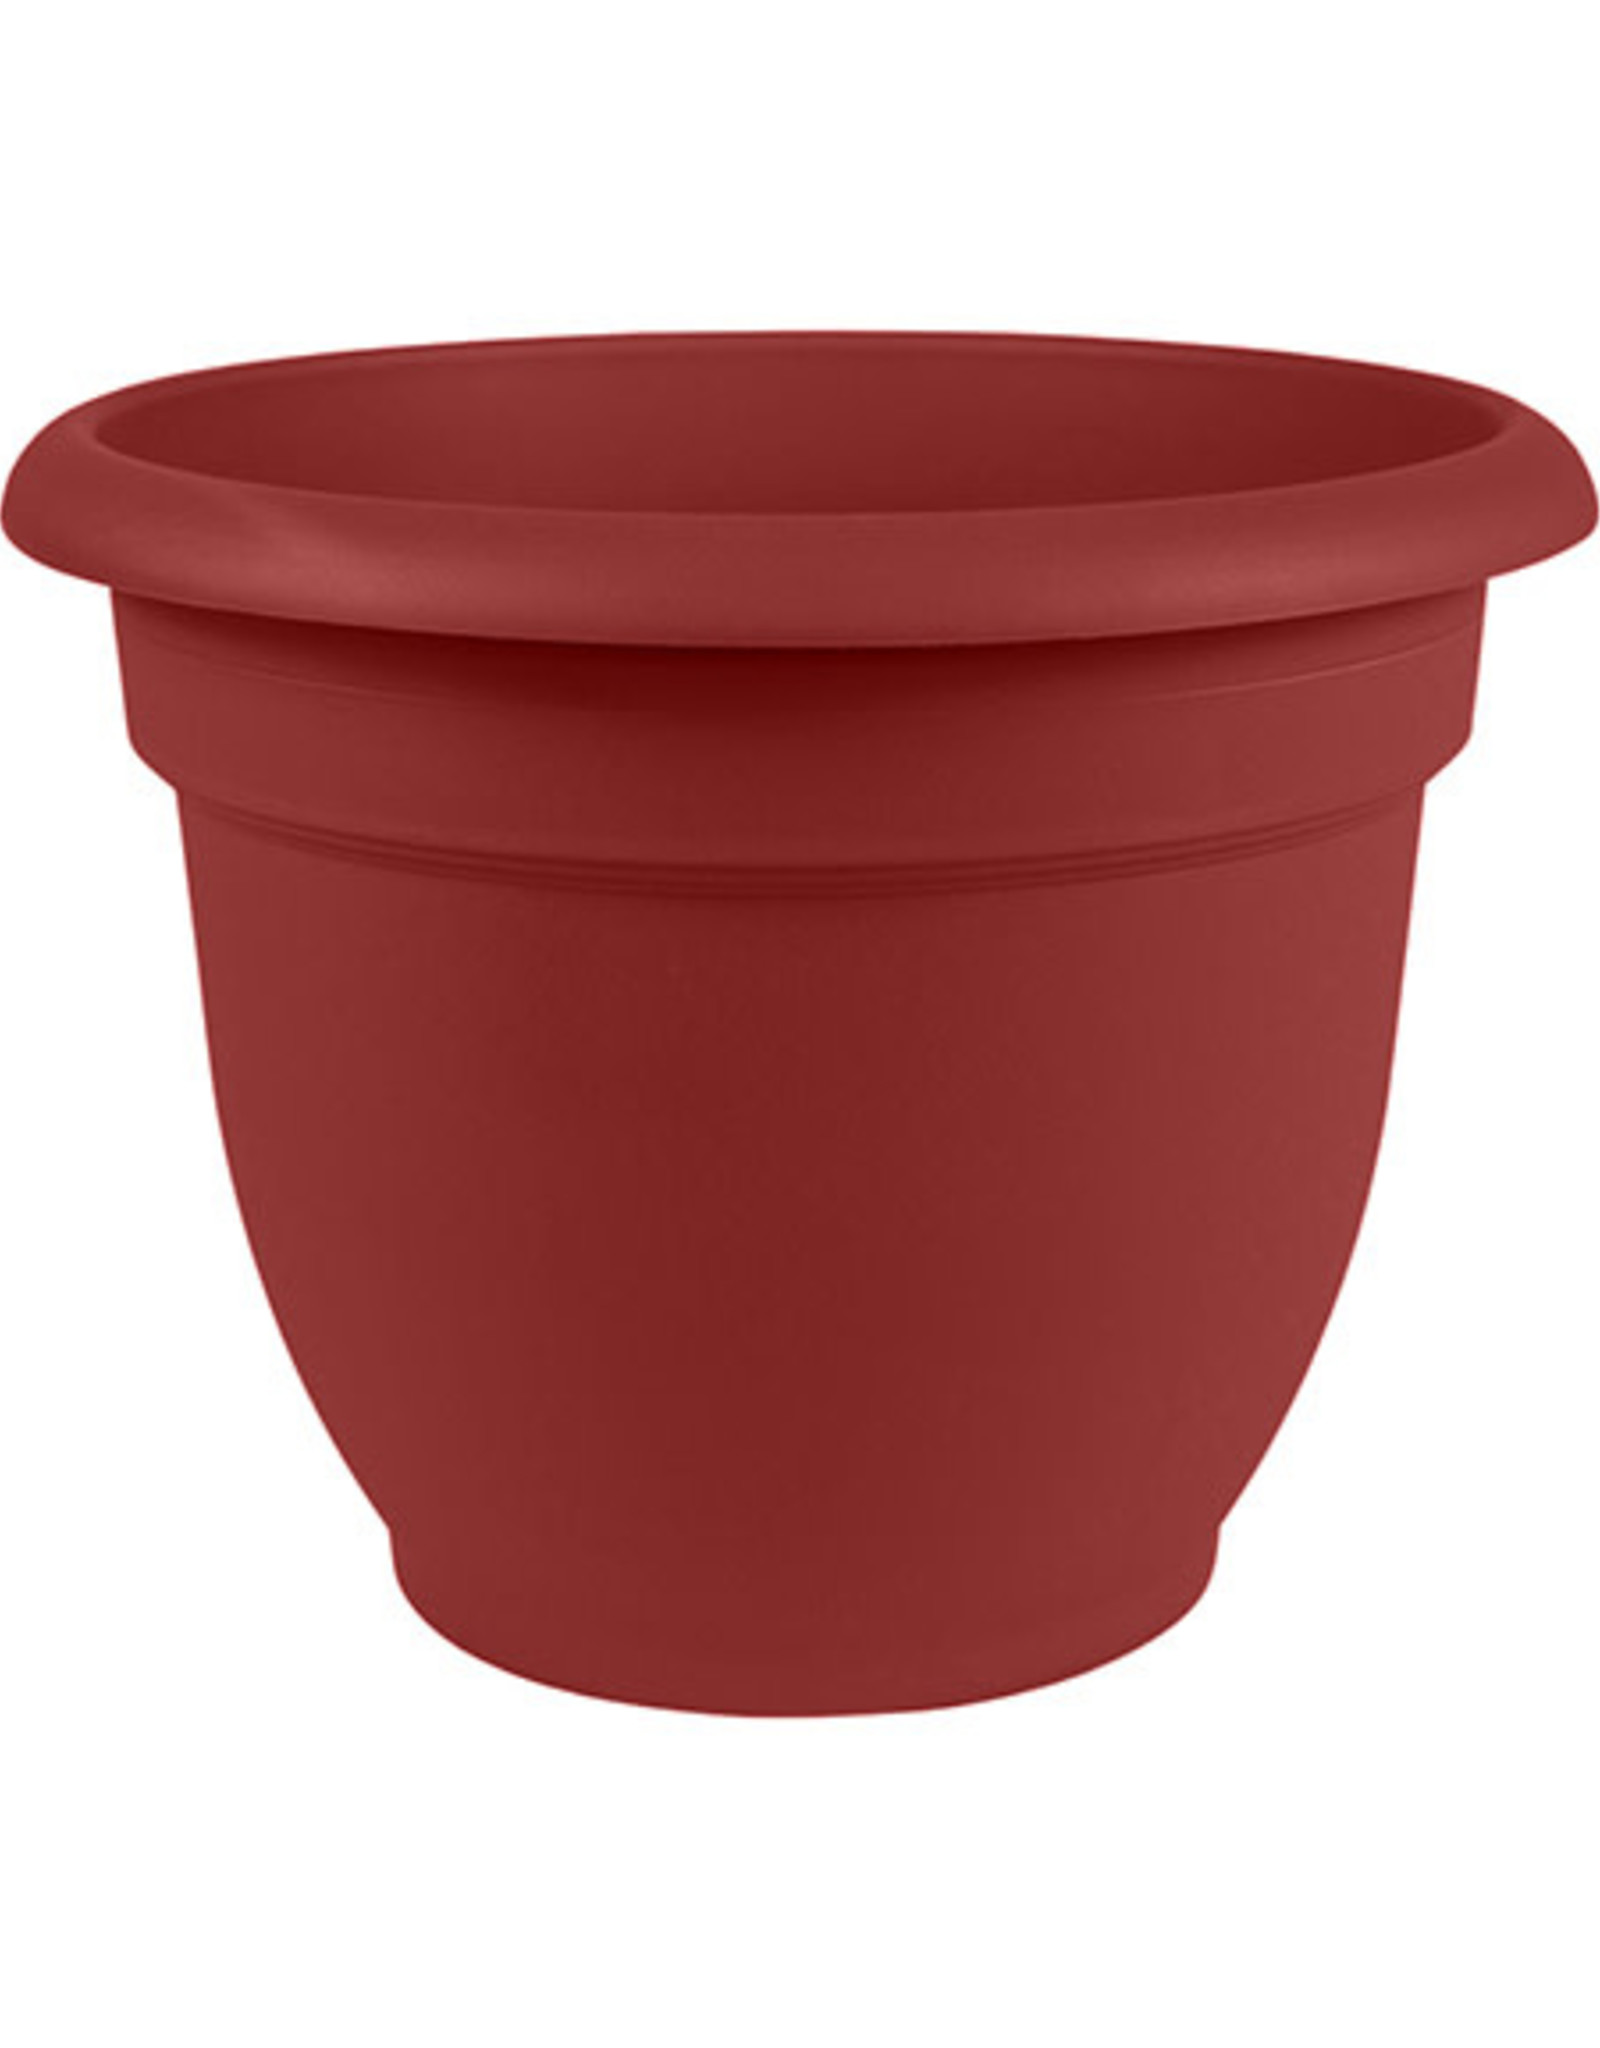 BLOEM Bloem Ariana Planter with Grid Burnt Red 12 in